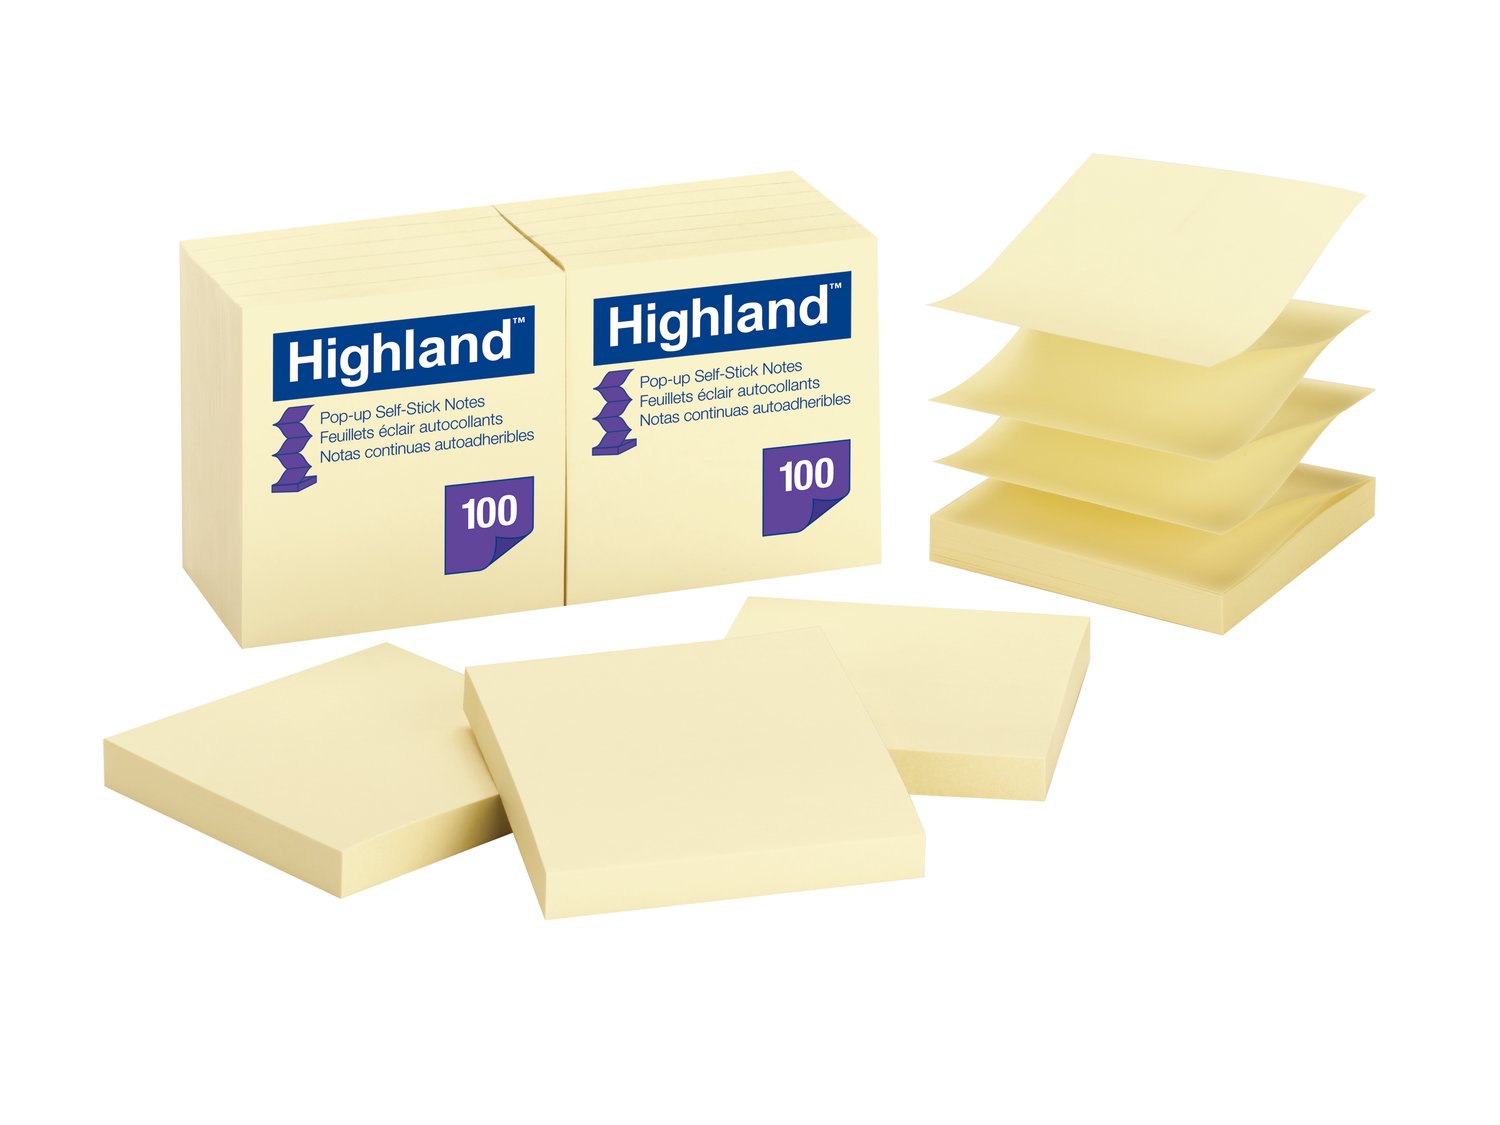 7100211856 - Highland Pop-up Self Stick Notes 6549-PuY, 3 in x 3 in